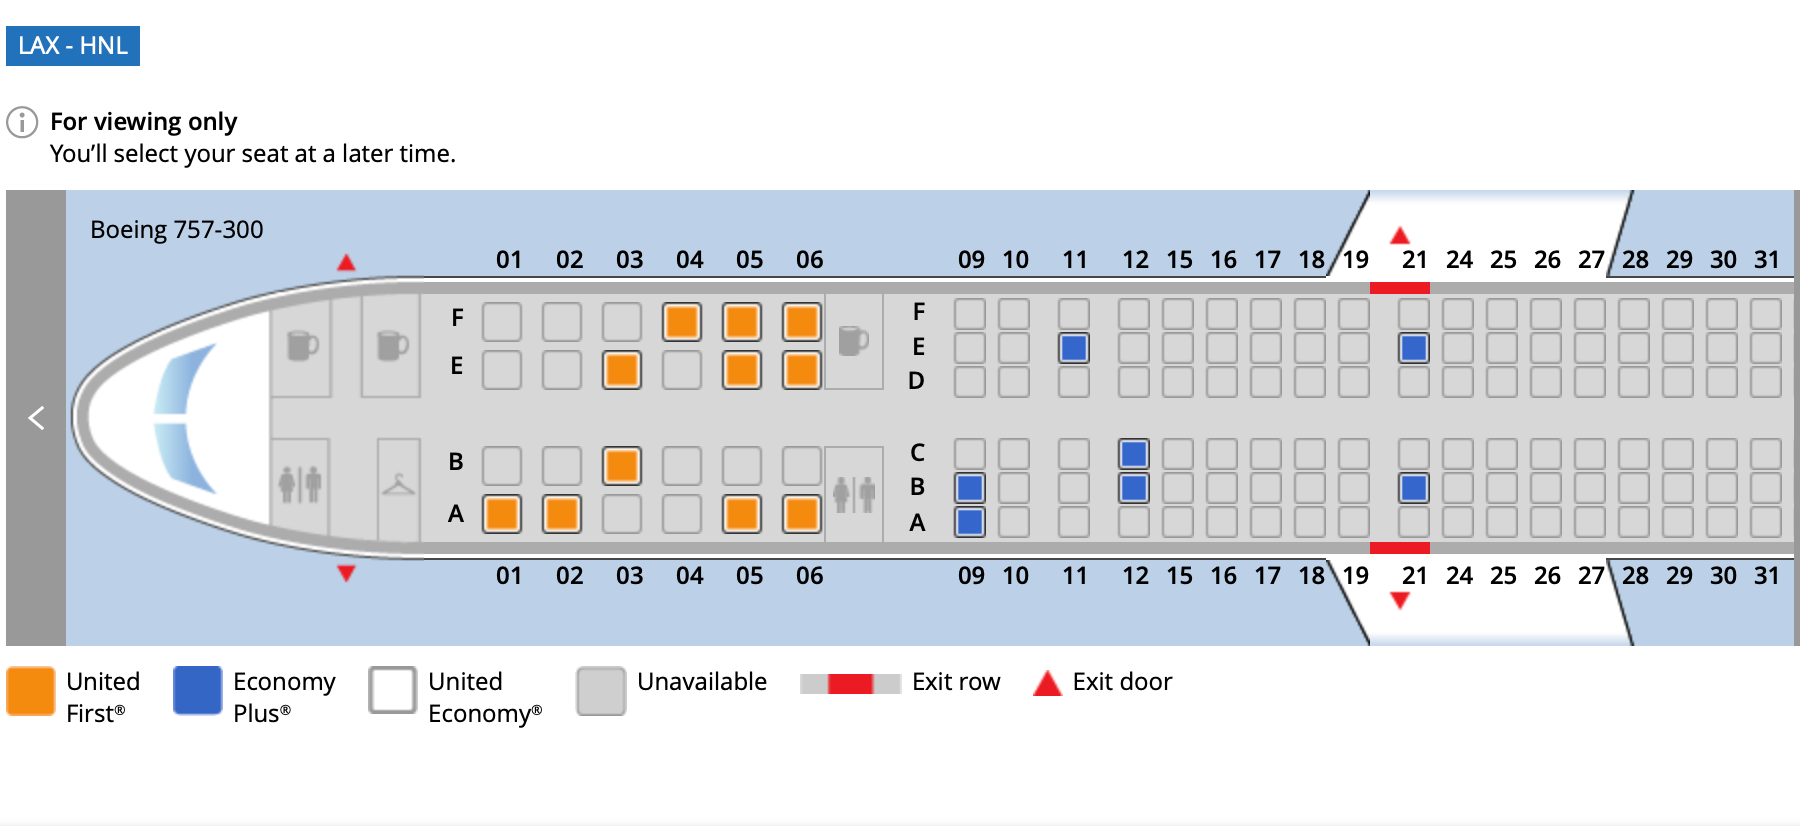 boeing 757 seating chart united airlines 757 300 aircraft seating c...